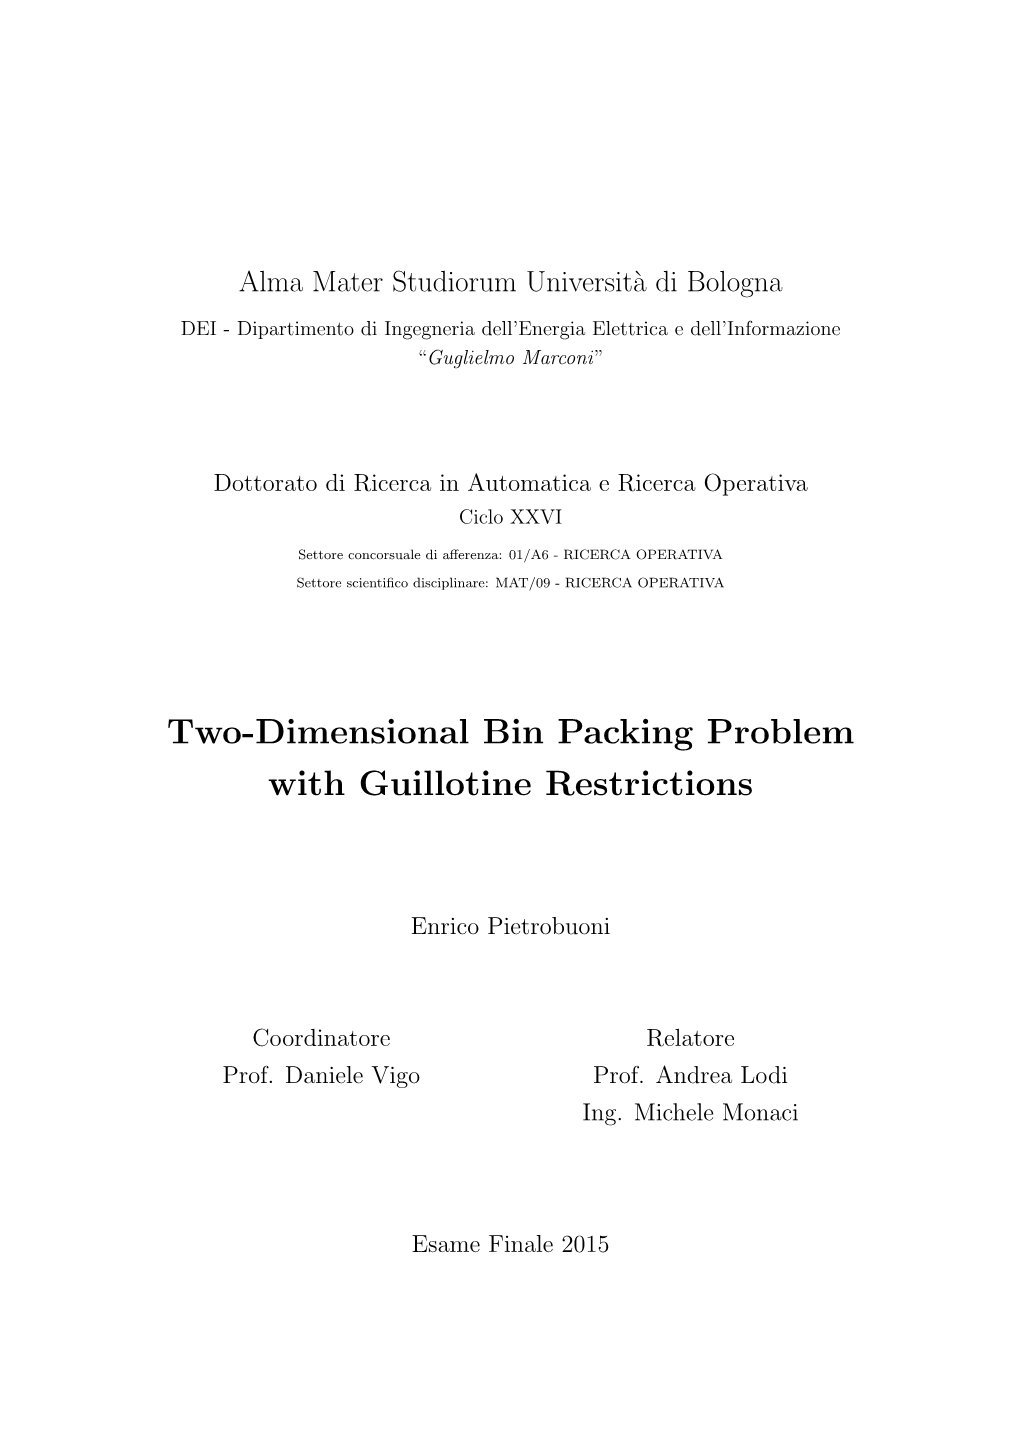 Two-Dimensional Bin Packing Problem with Guillotine Restrictions